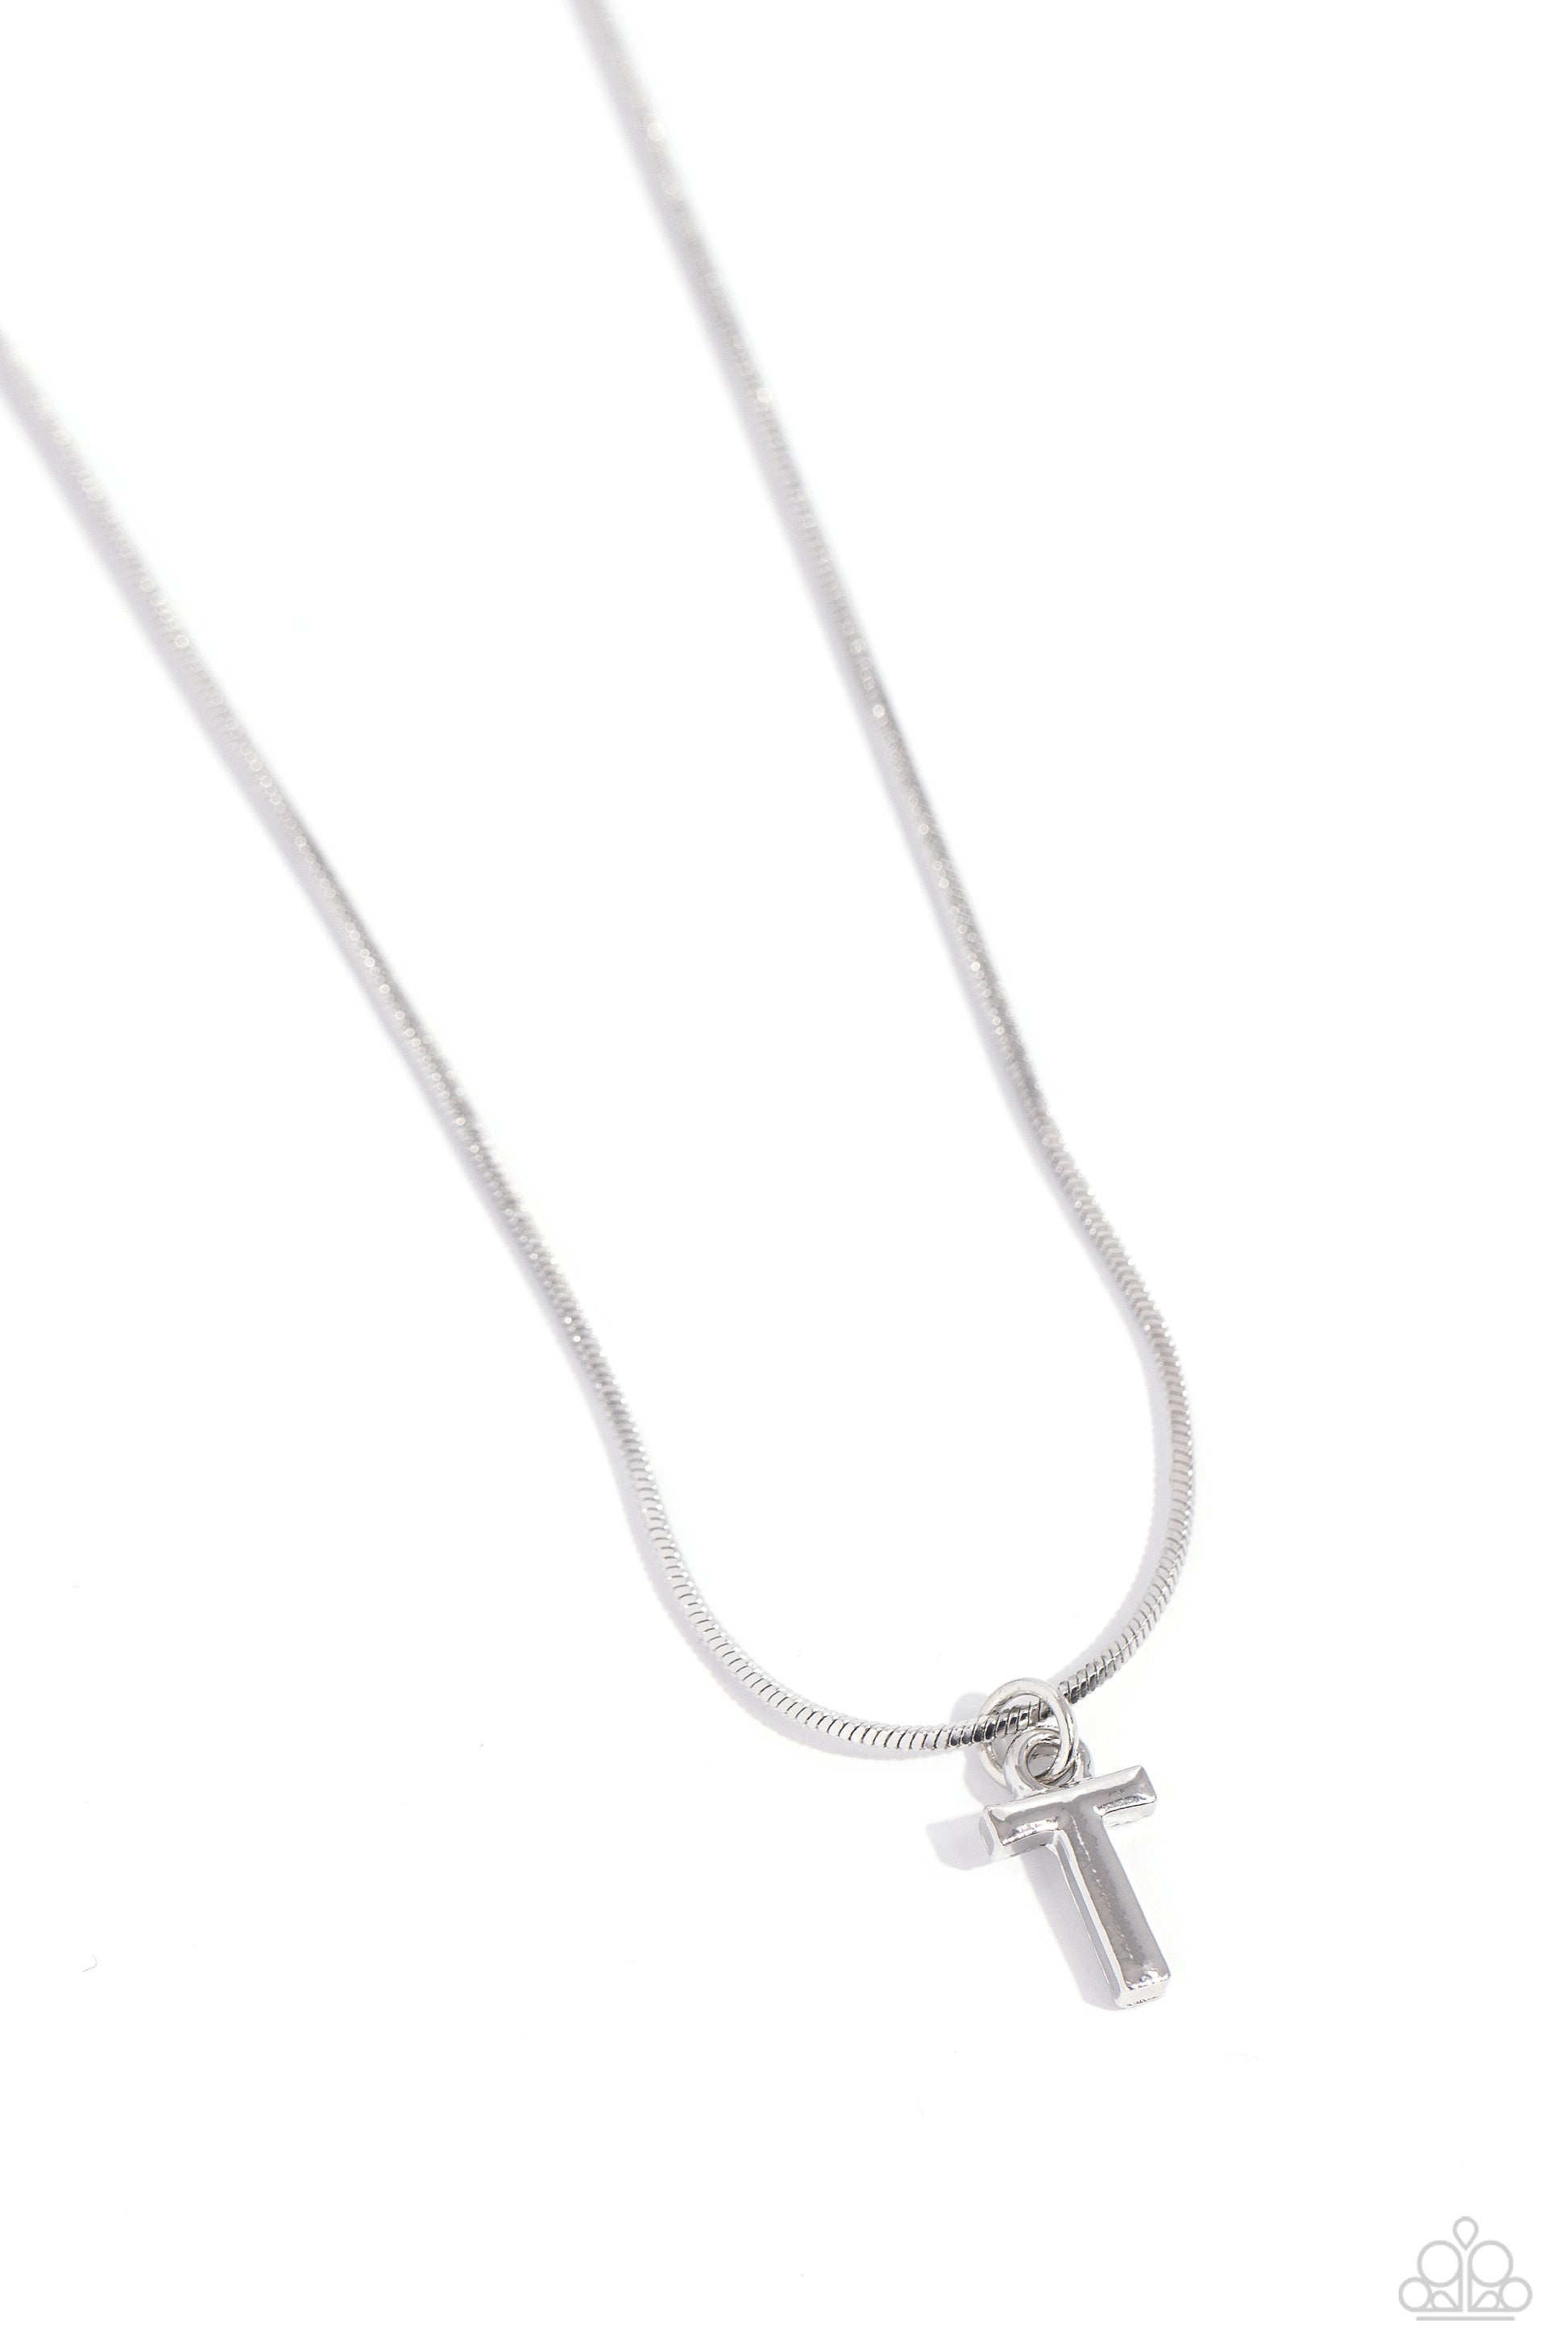 Seize the Initial - silver - T - Paparazzi necklace